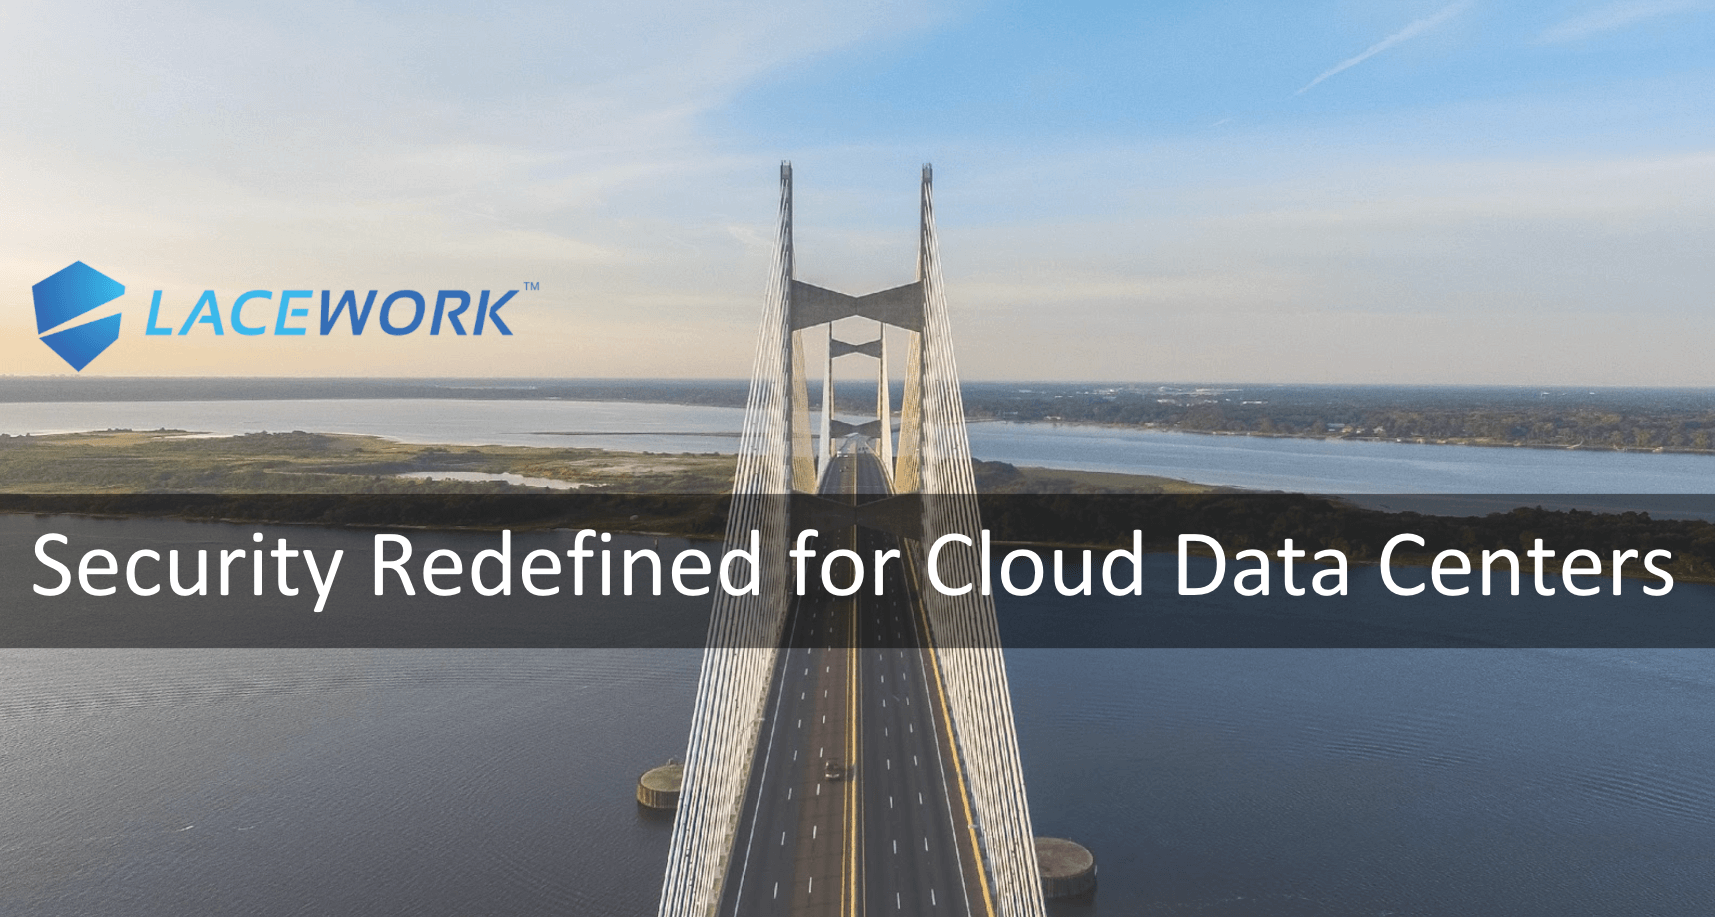 Why I joined Lacework: the opportunity to define a better approach to Securing the Cloud